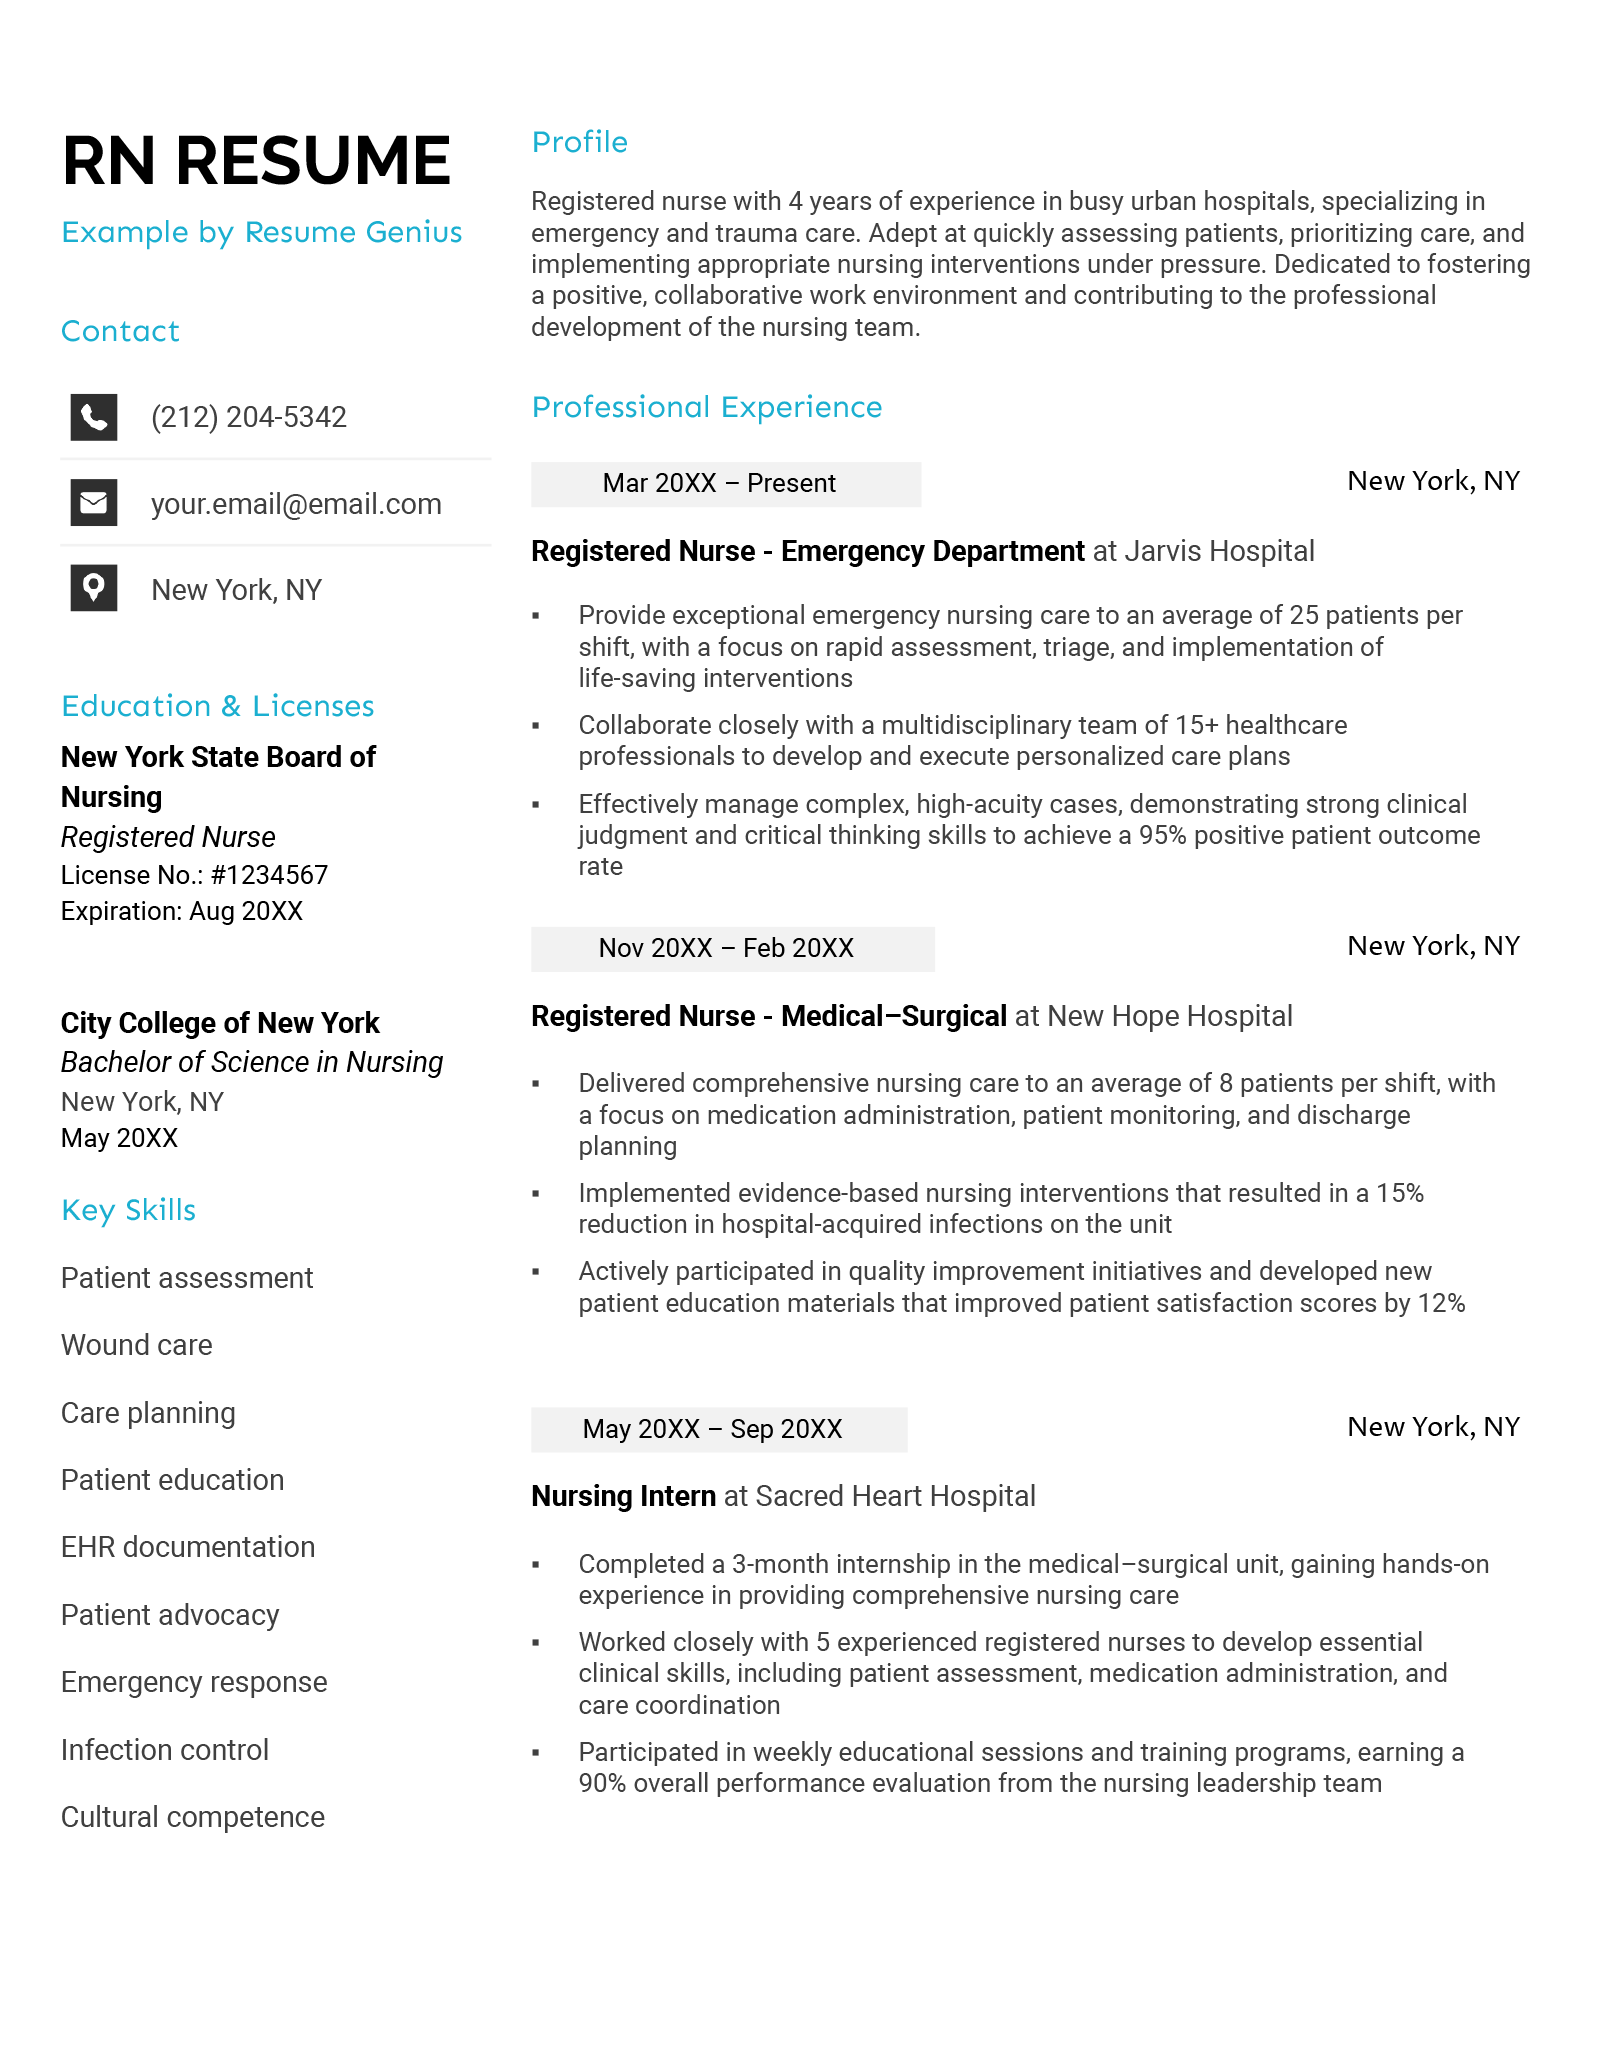 An example resume for an RN.